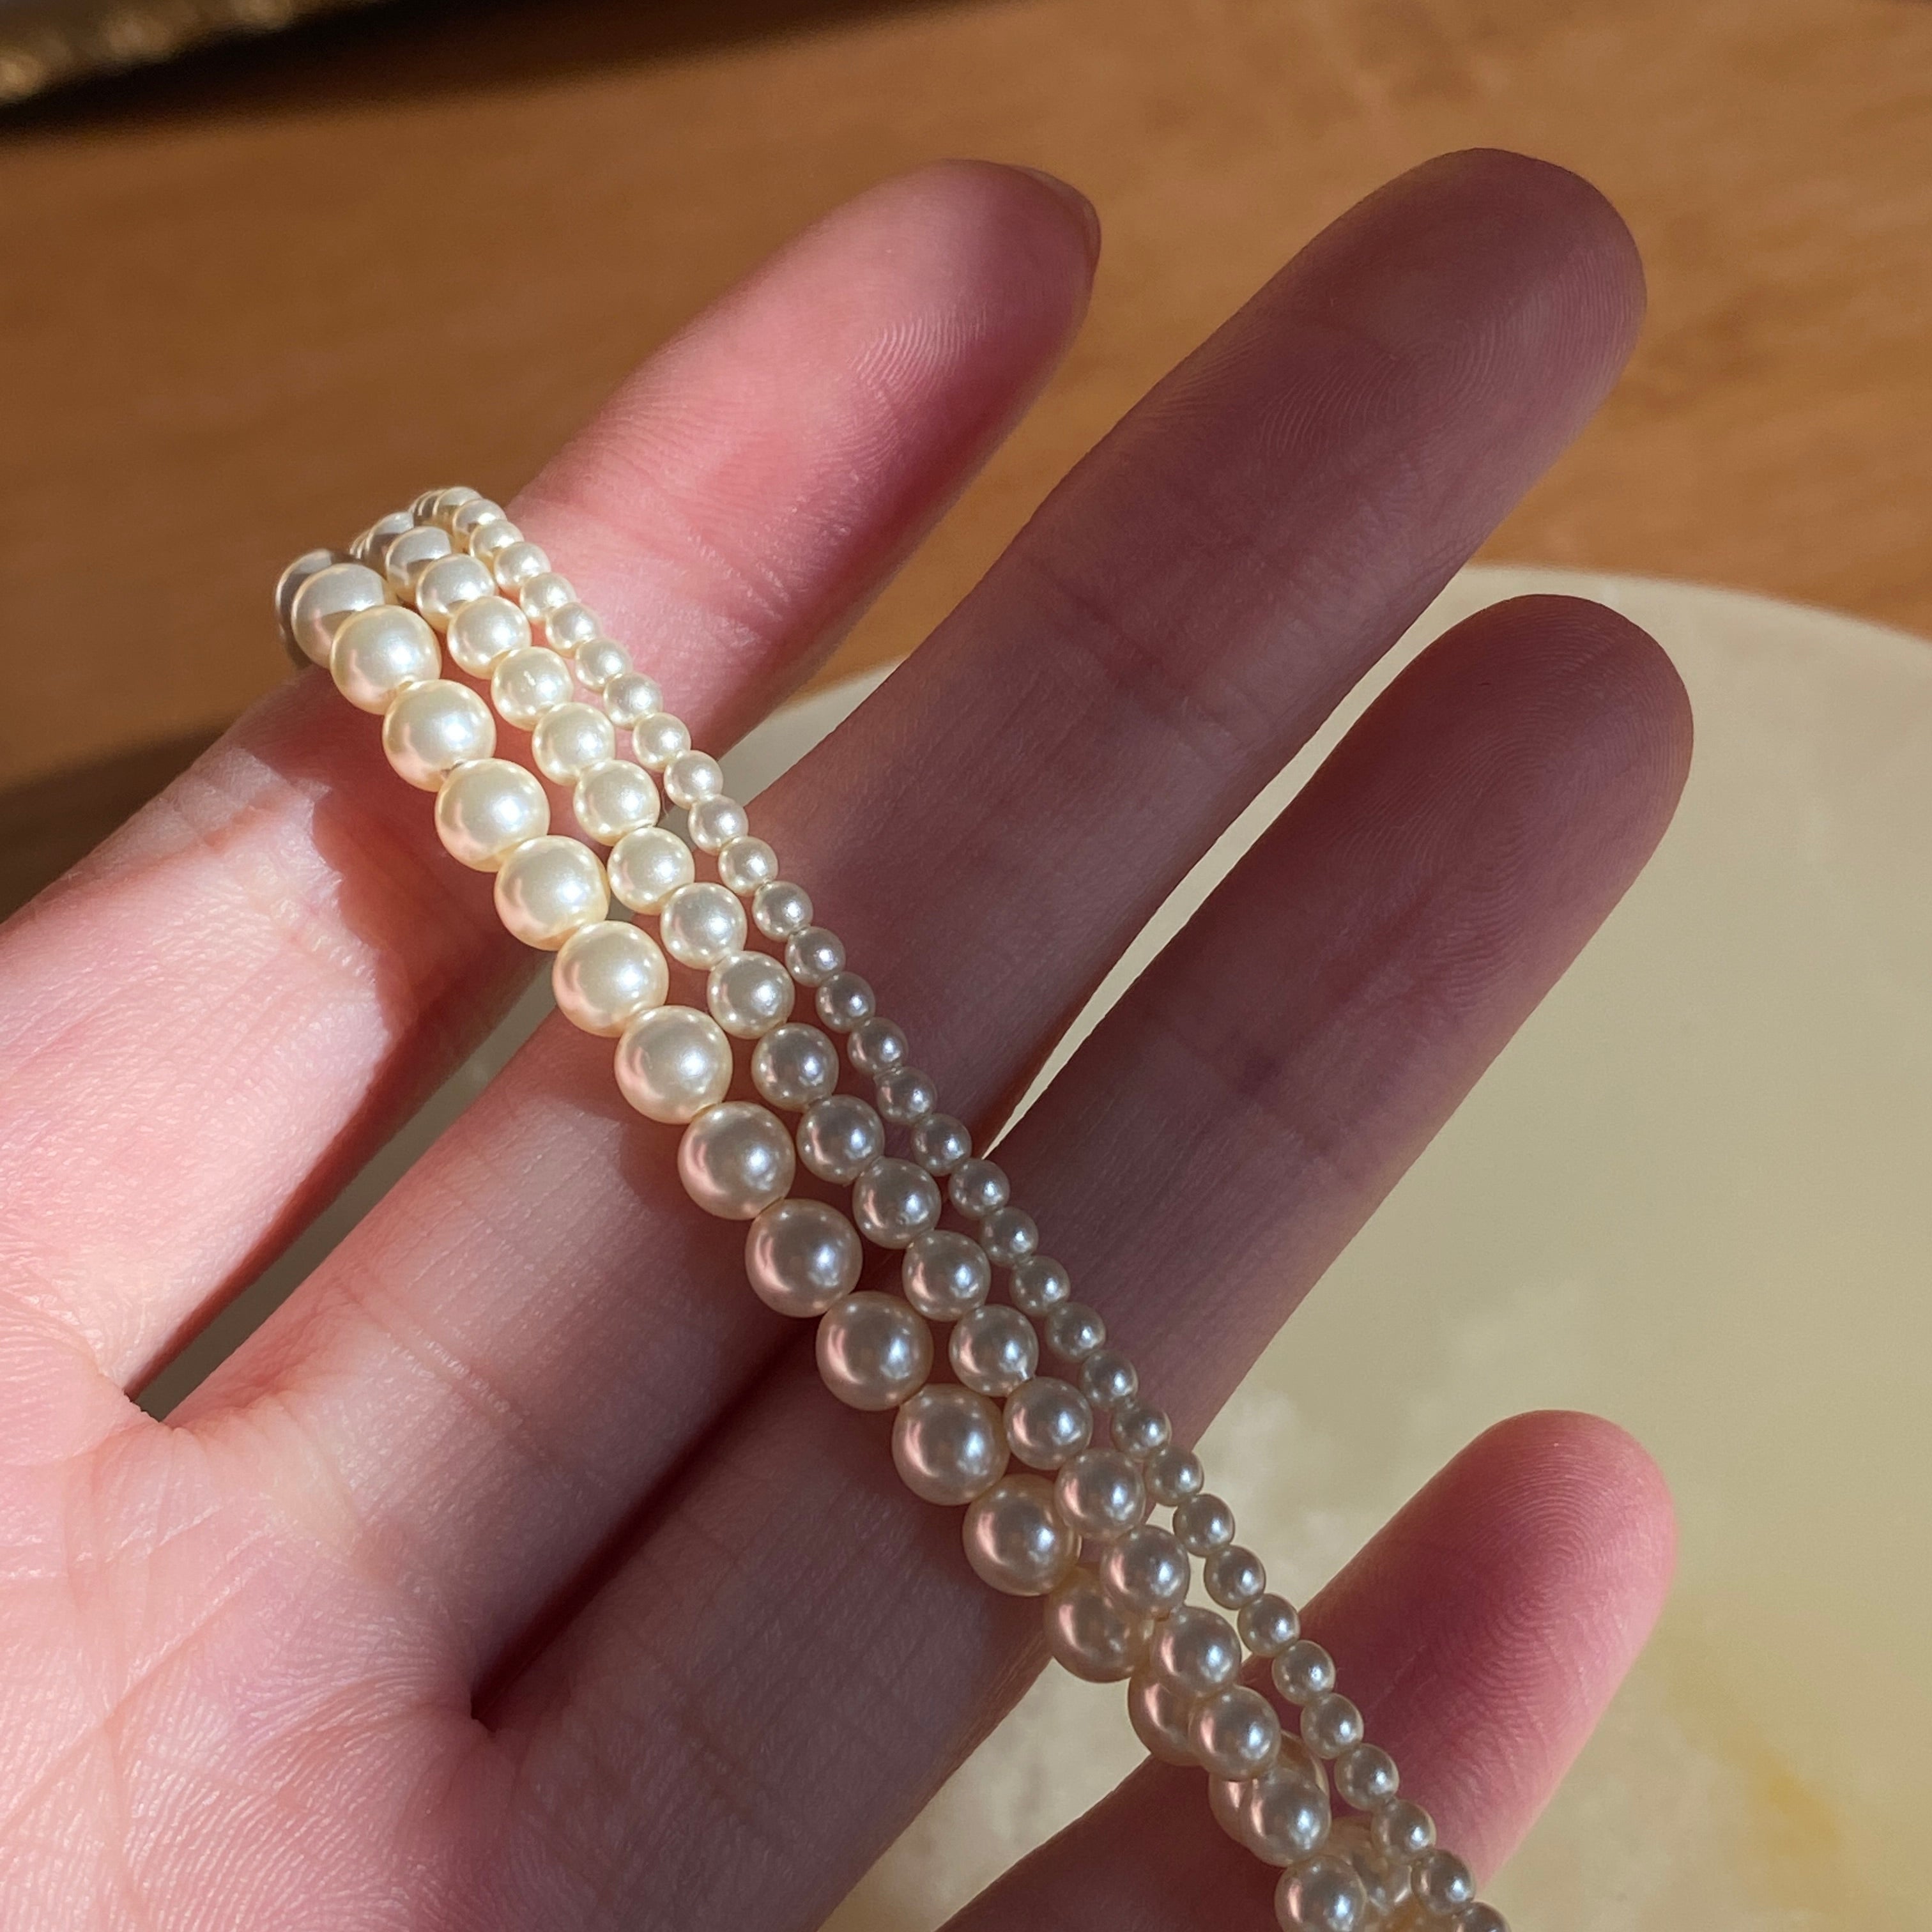 Handmade 14K Gold-Covered Pearl Necklace